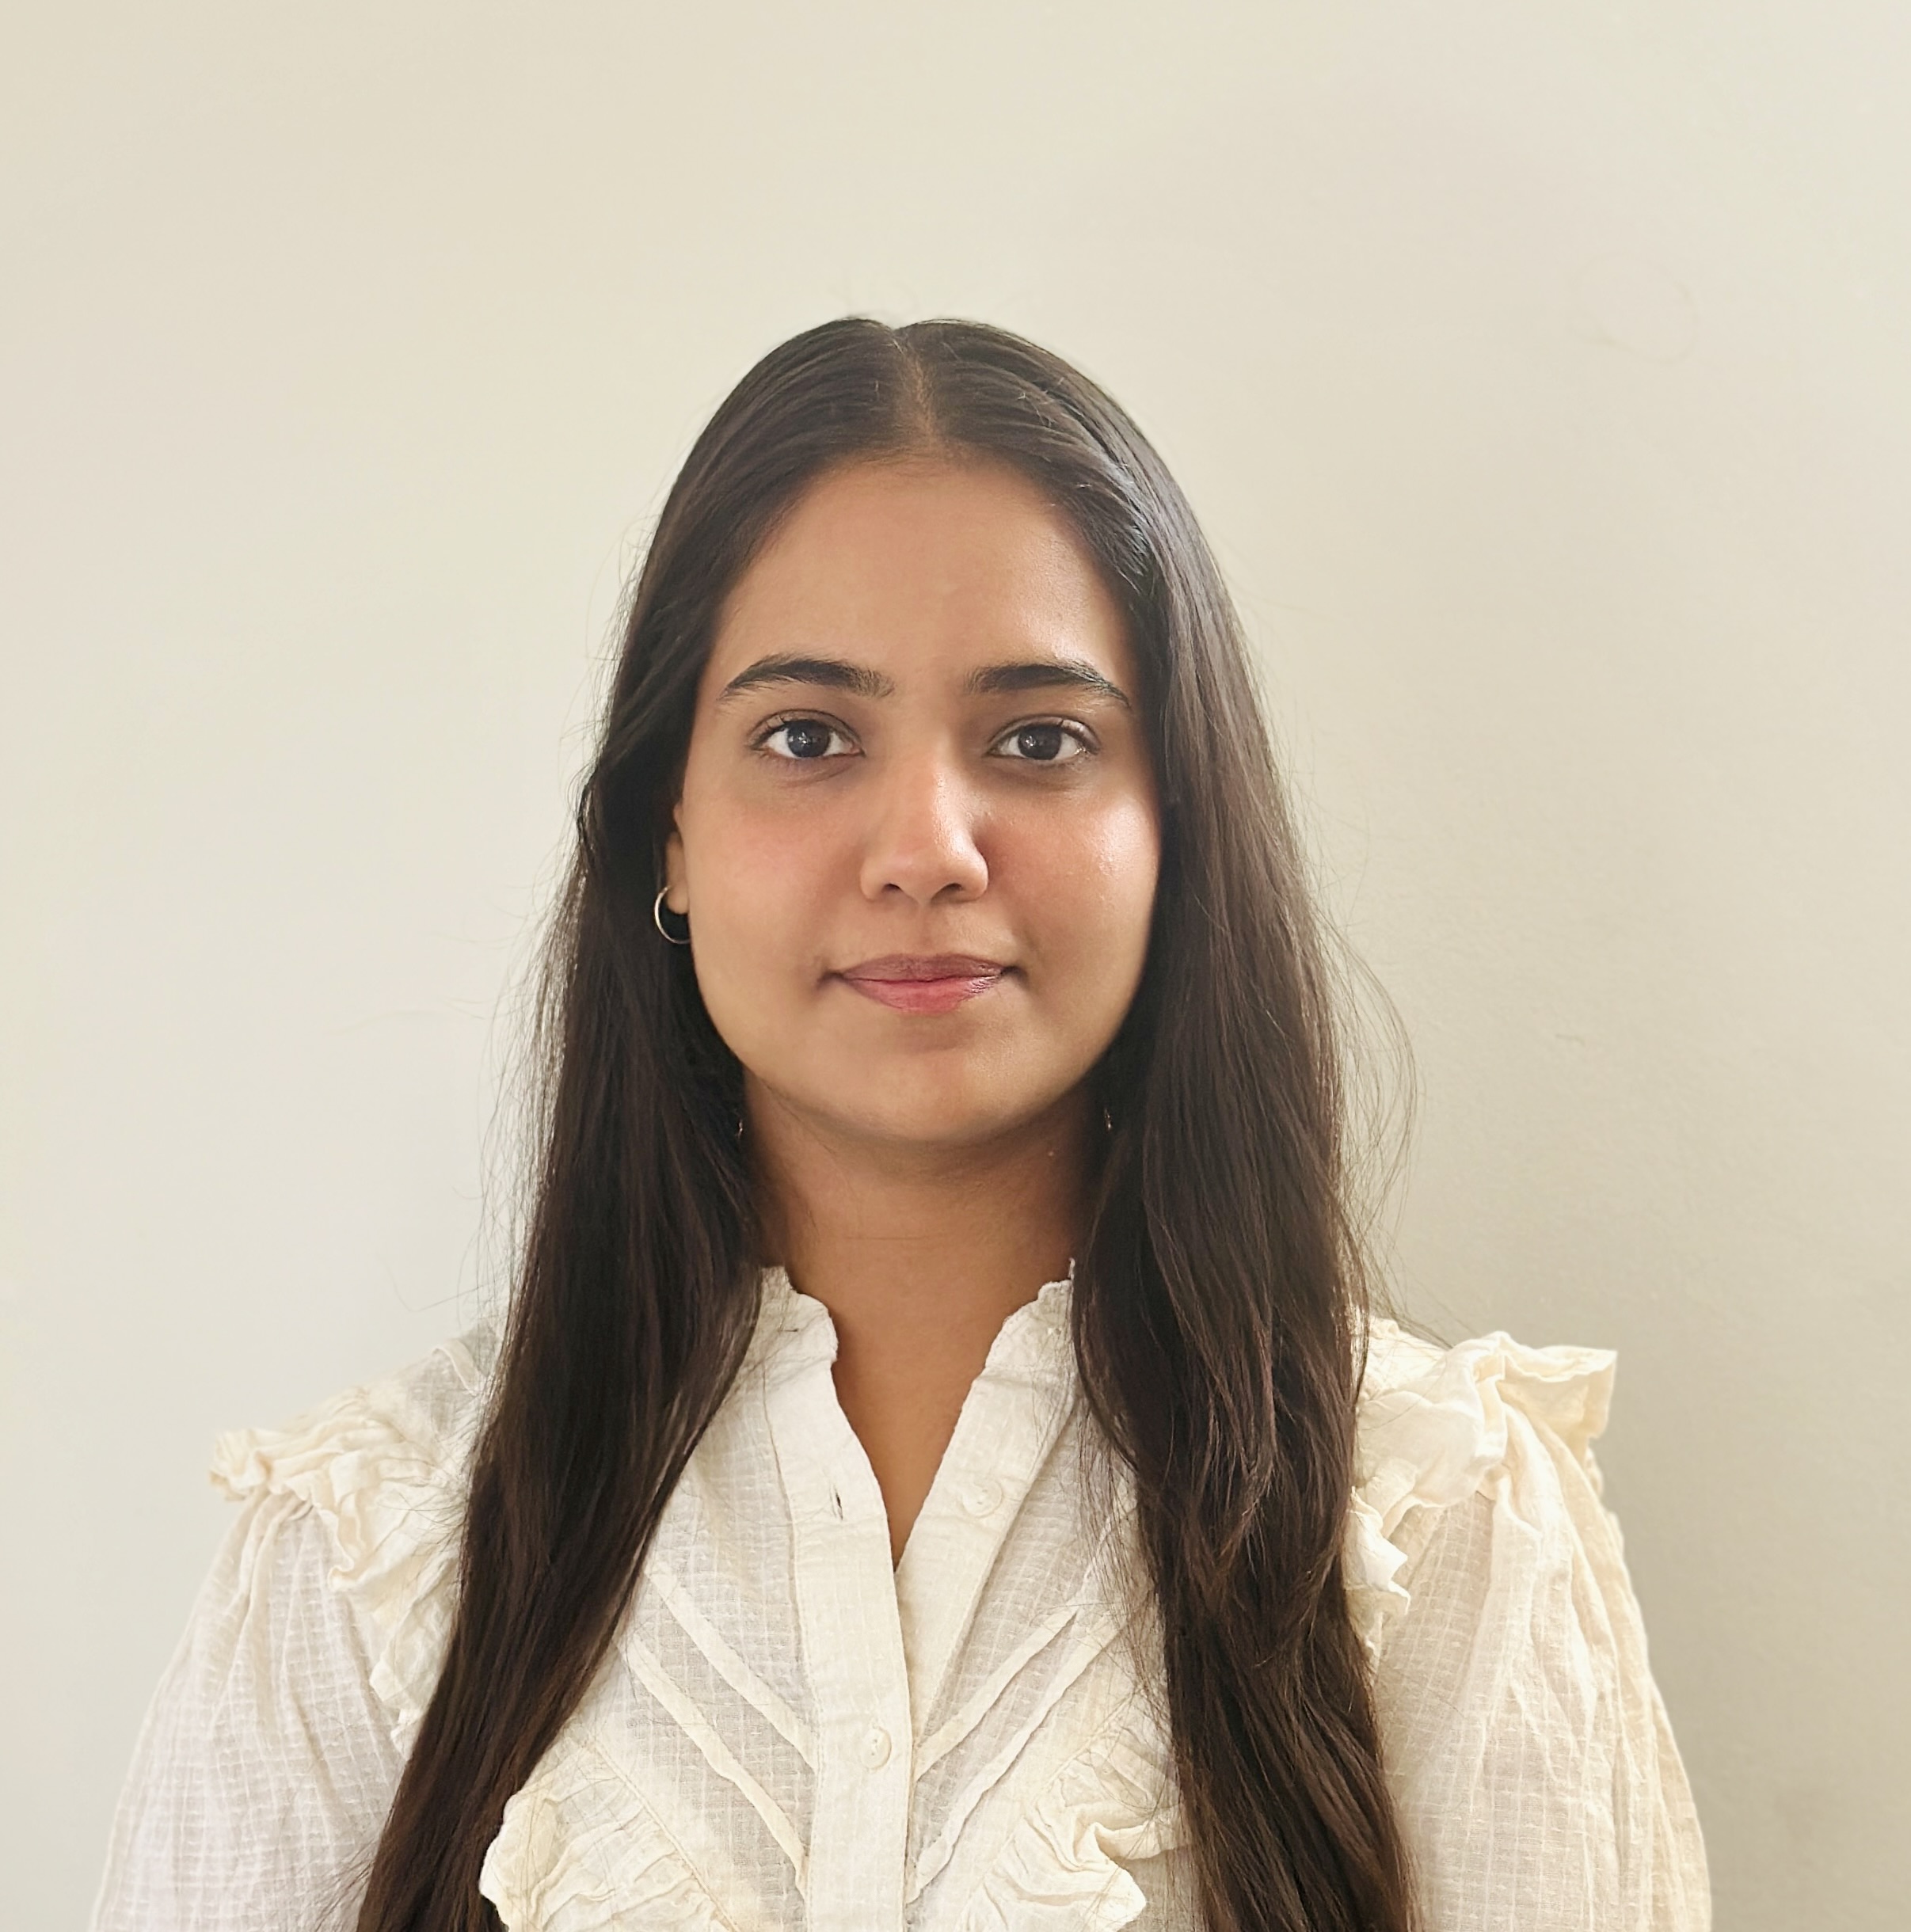 Portrait of Sakshi Kaushal, a young woman with long brown hair, wearing a white ruffled blouse, smiling subtly at the camera against a plain background.